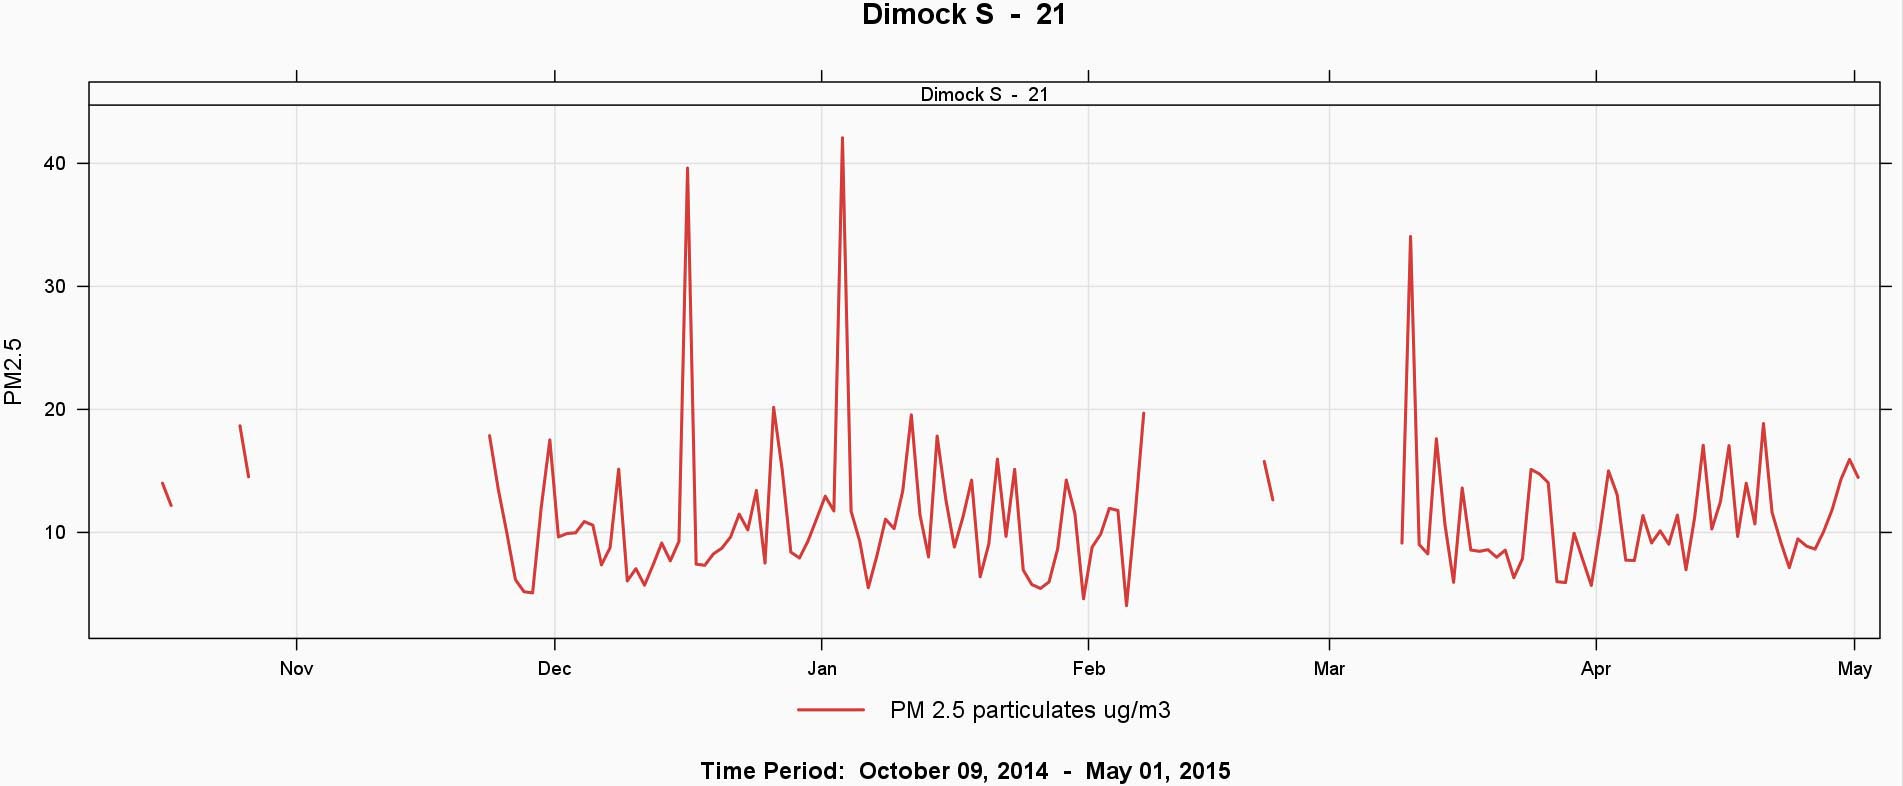 Fig2_Dimock_S_21_24hour_Line